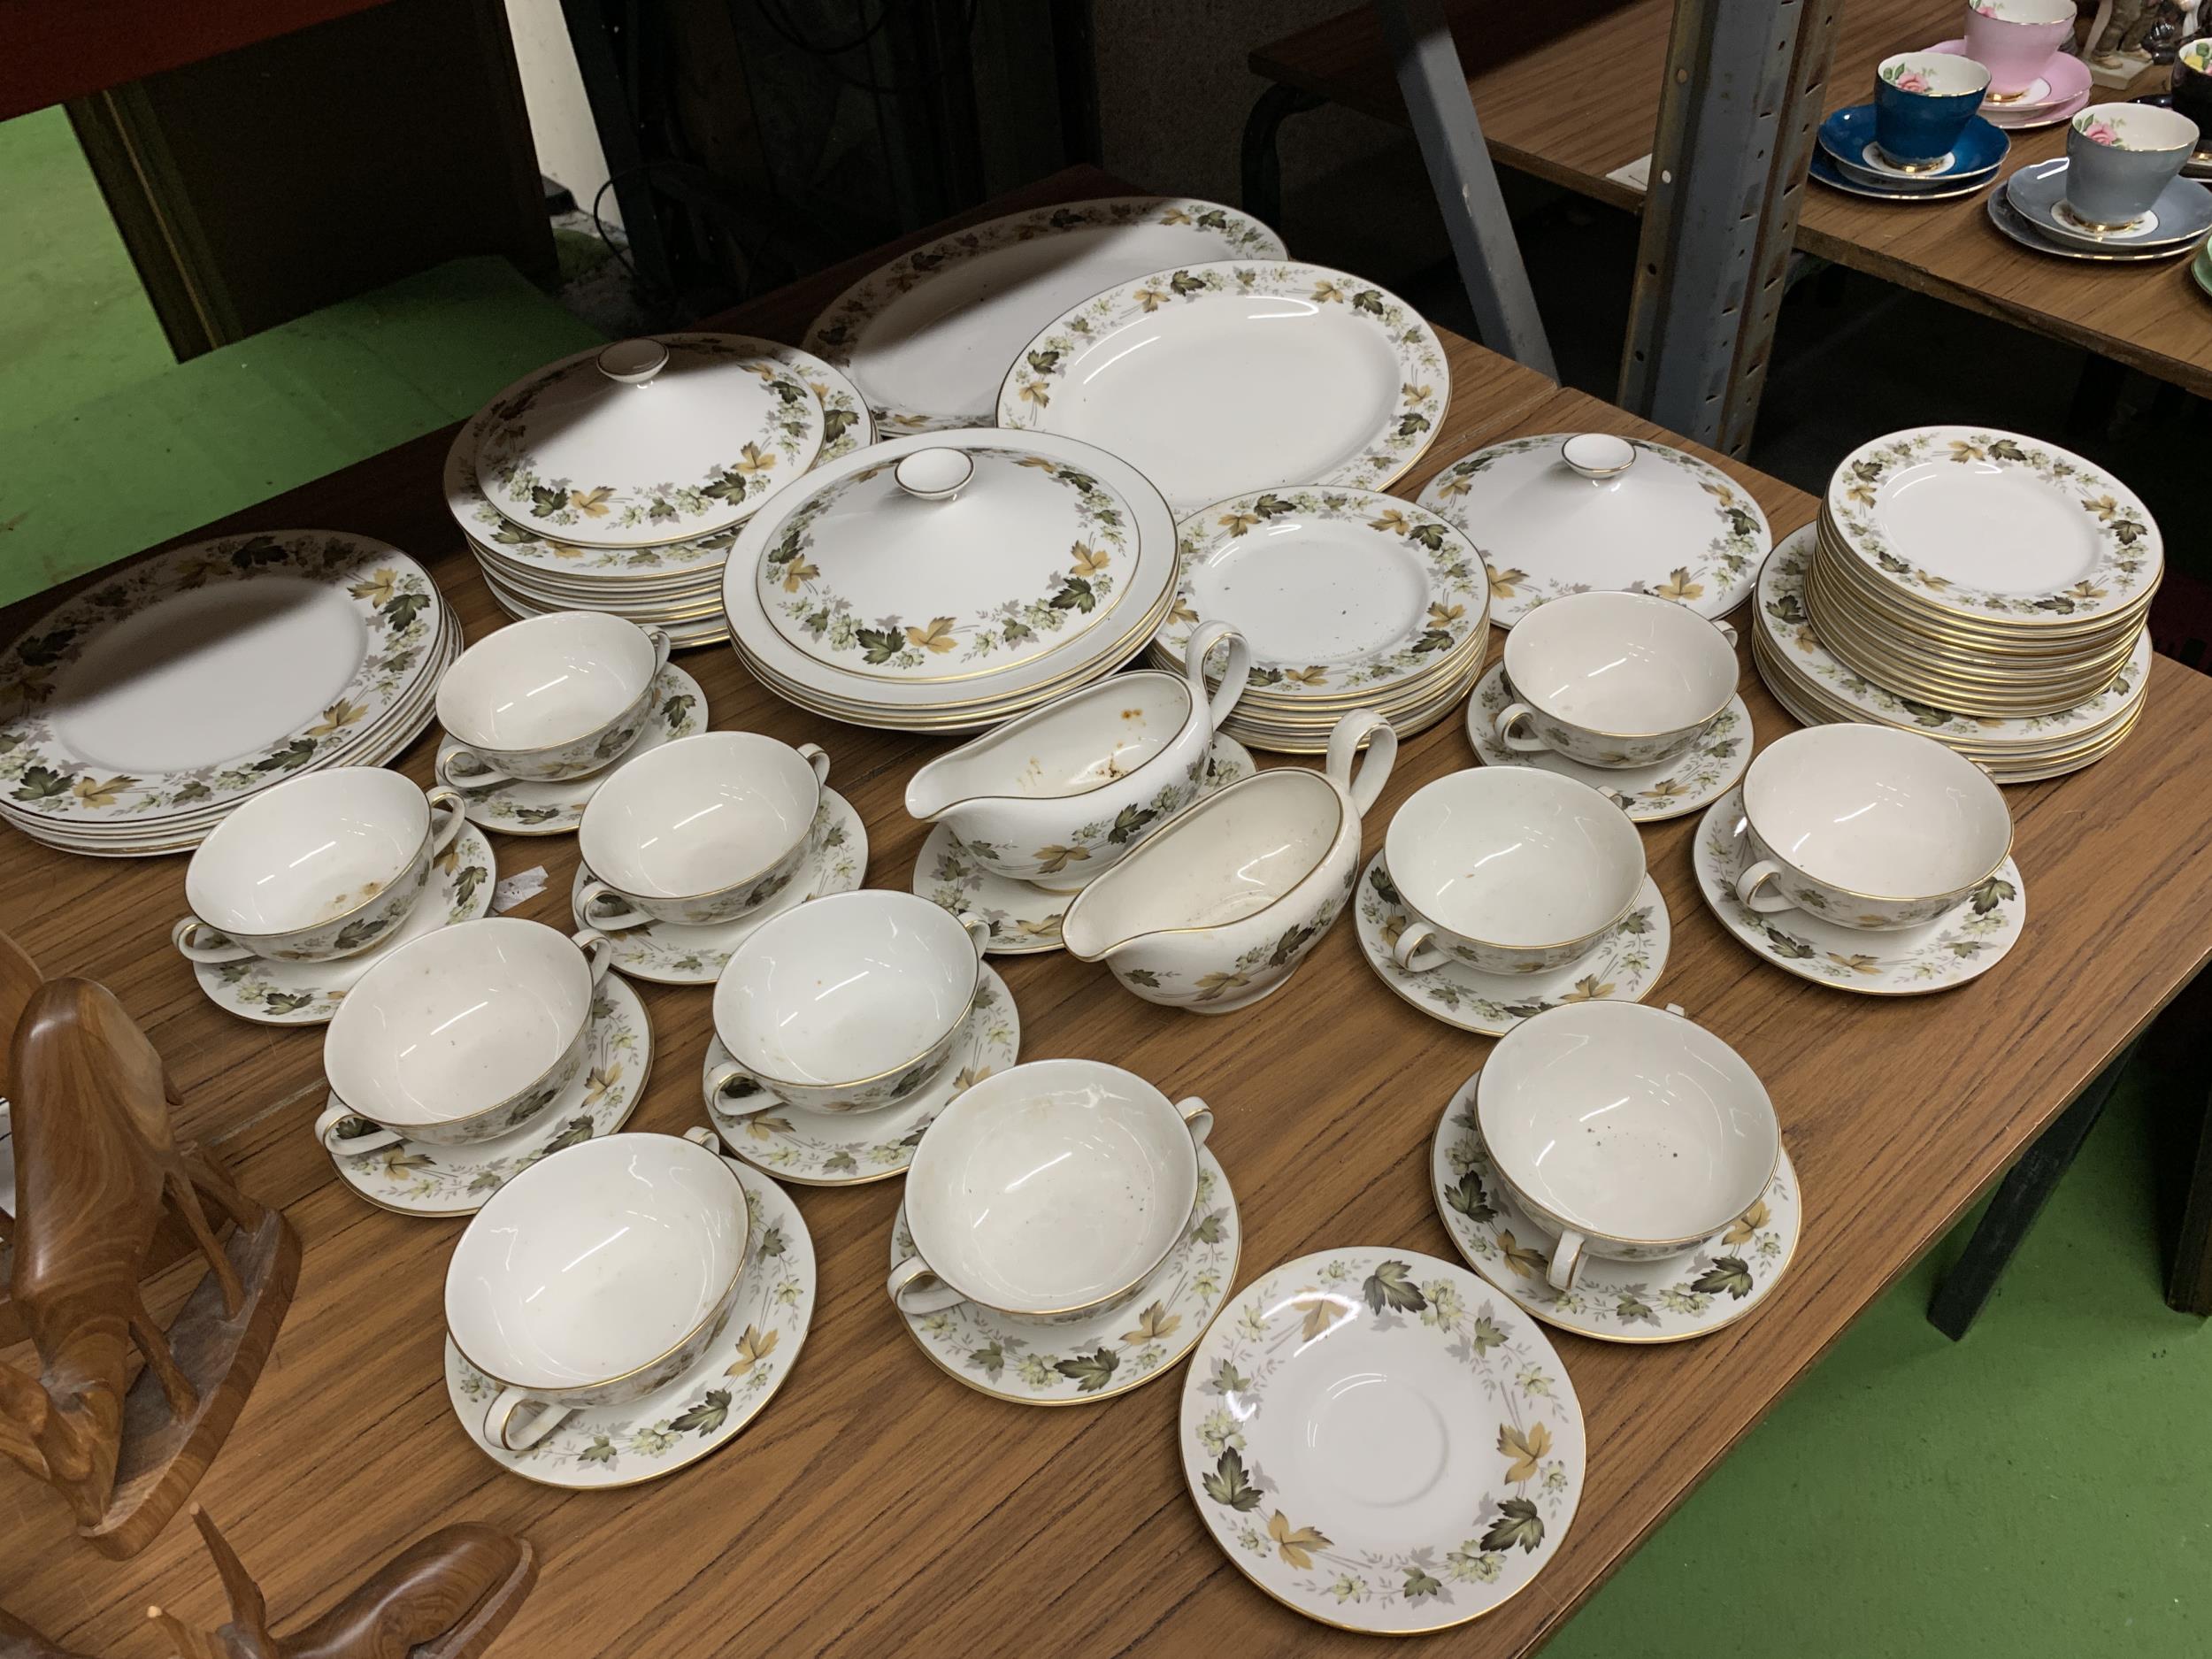 A ROYAL DOULTON 'LARCHMONT' PART DINNER SERVICE TO INCLUDE VARIOUS SIZES OF PLATES, SERVING BOWLS, - Image 2 of 4